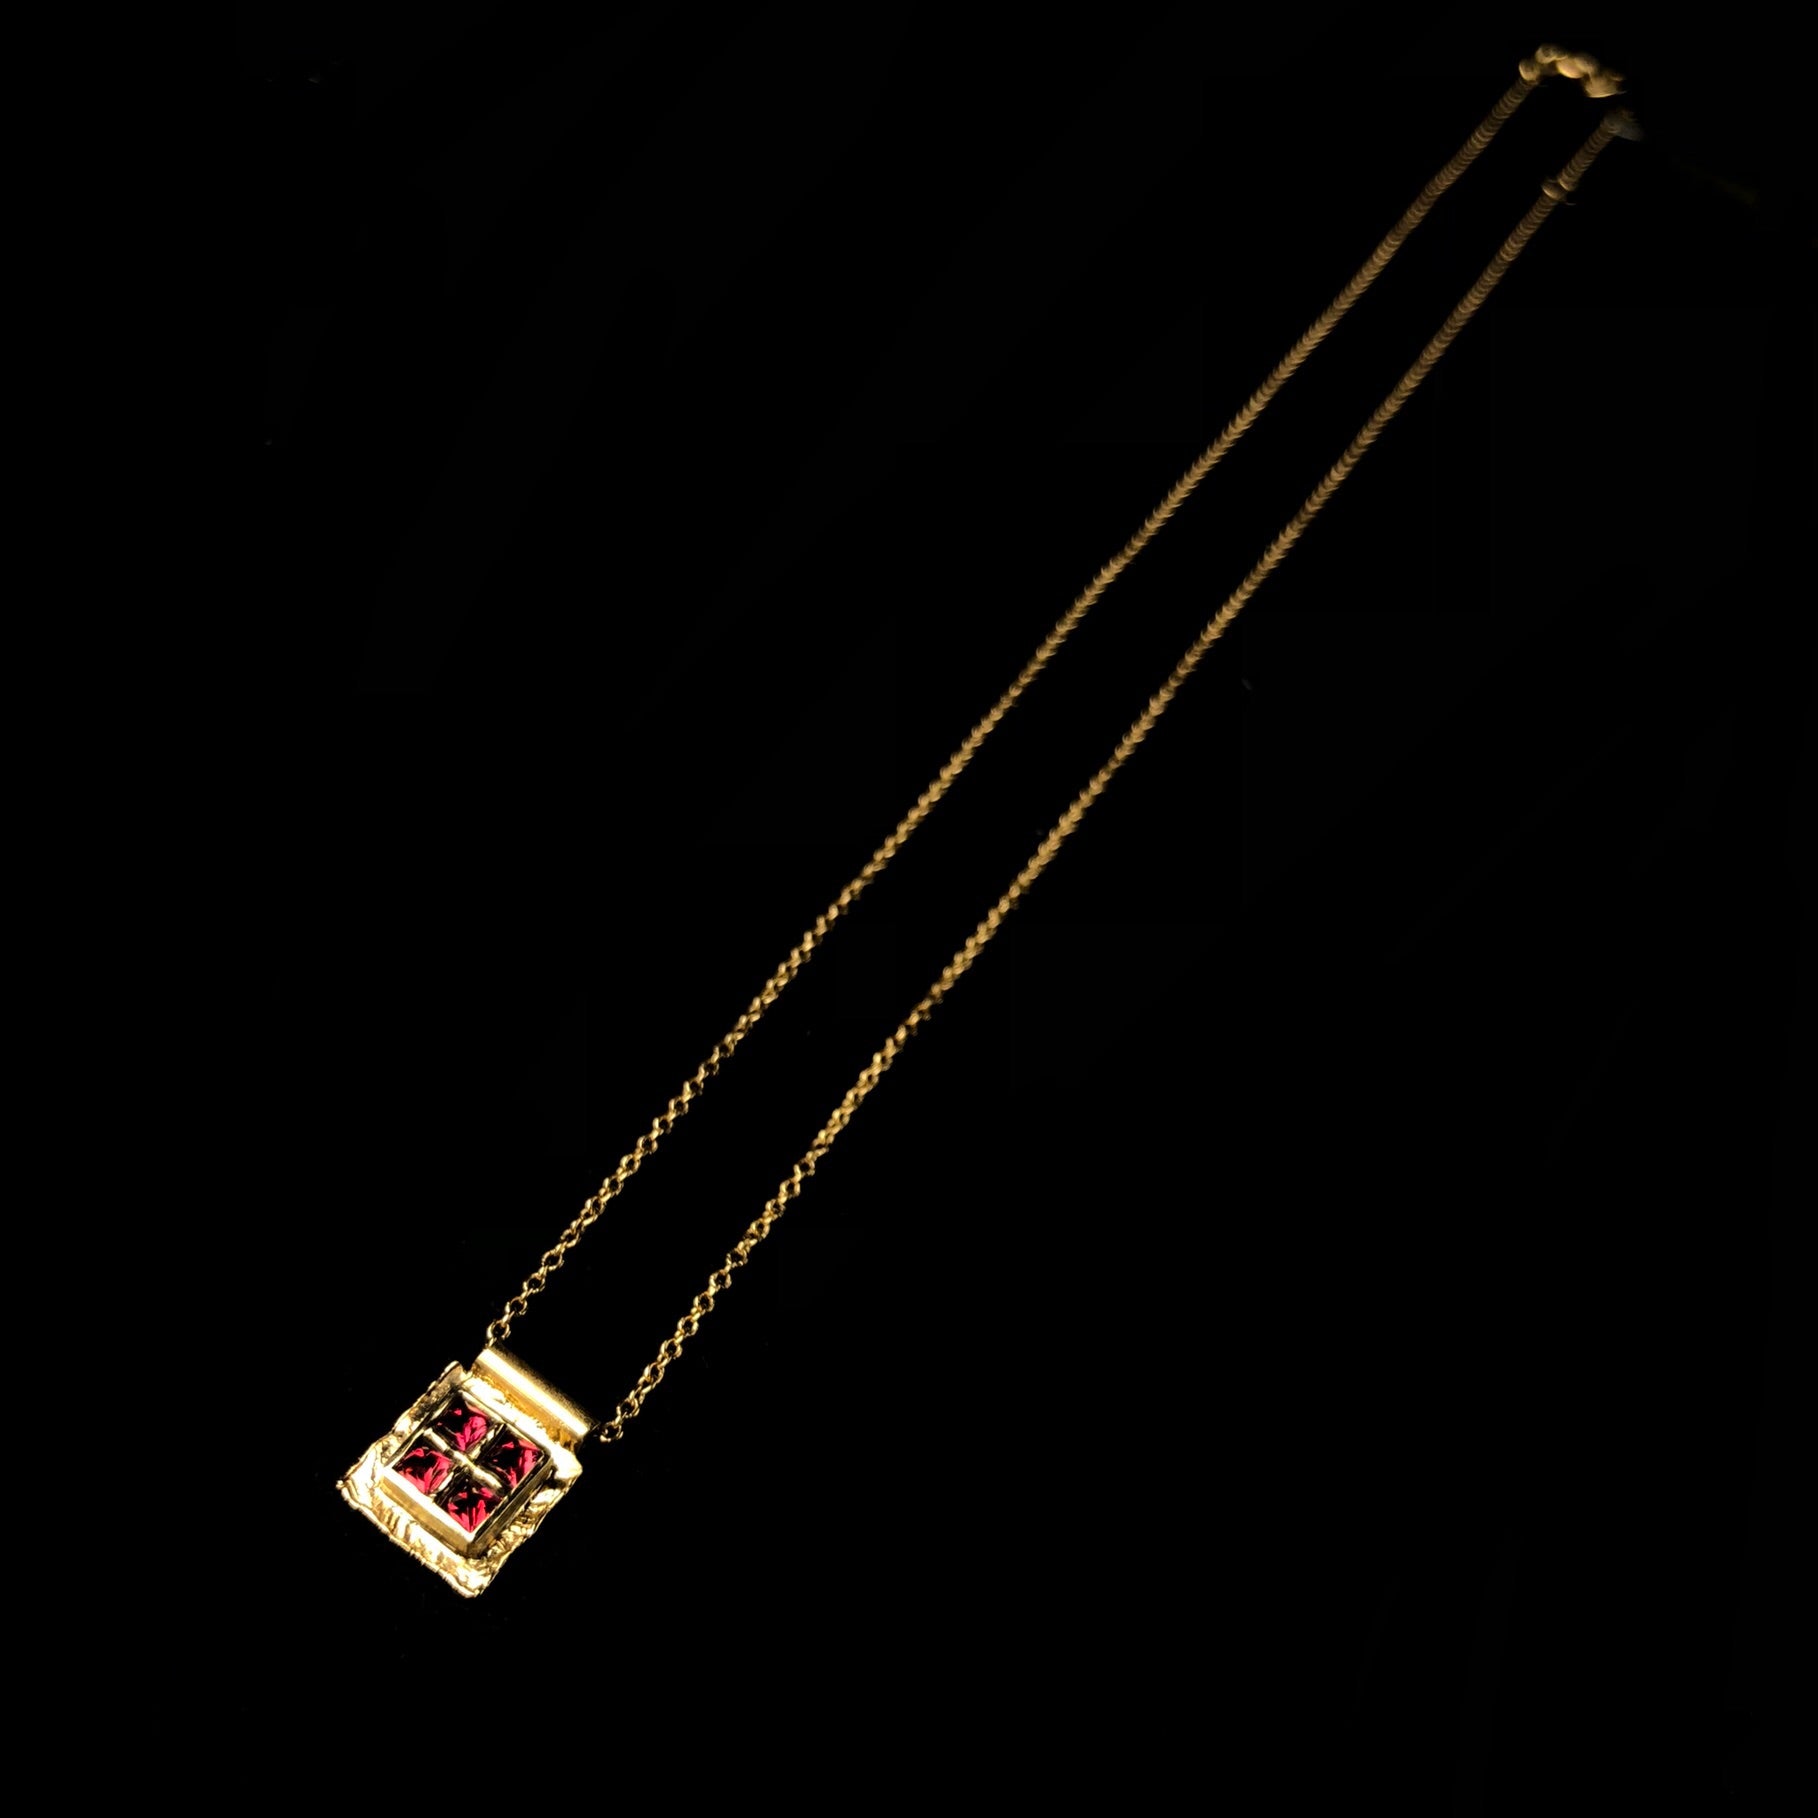 Four red spinel stones in gold platform on chain